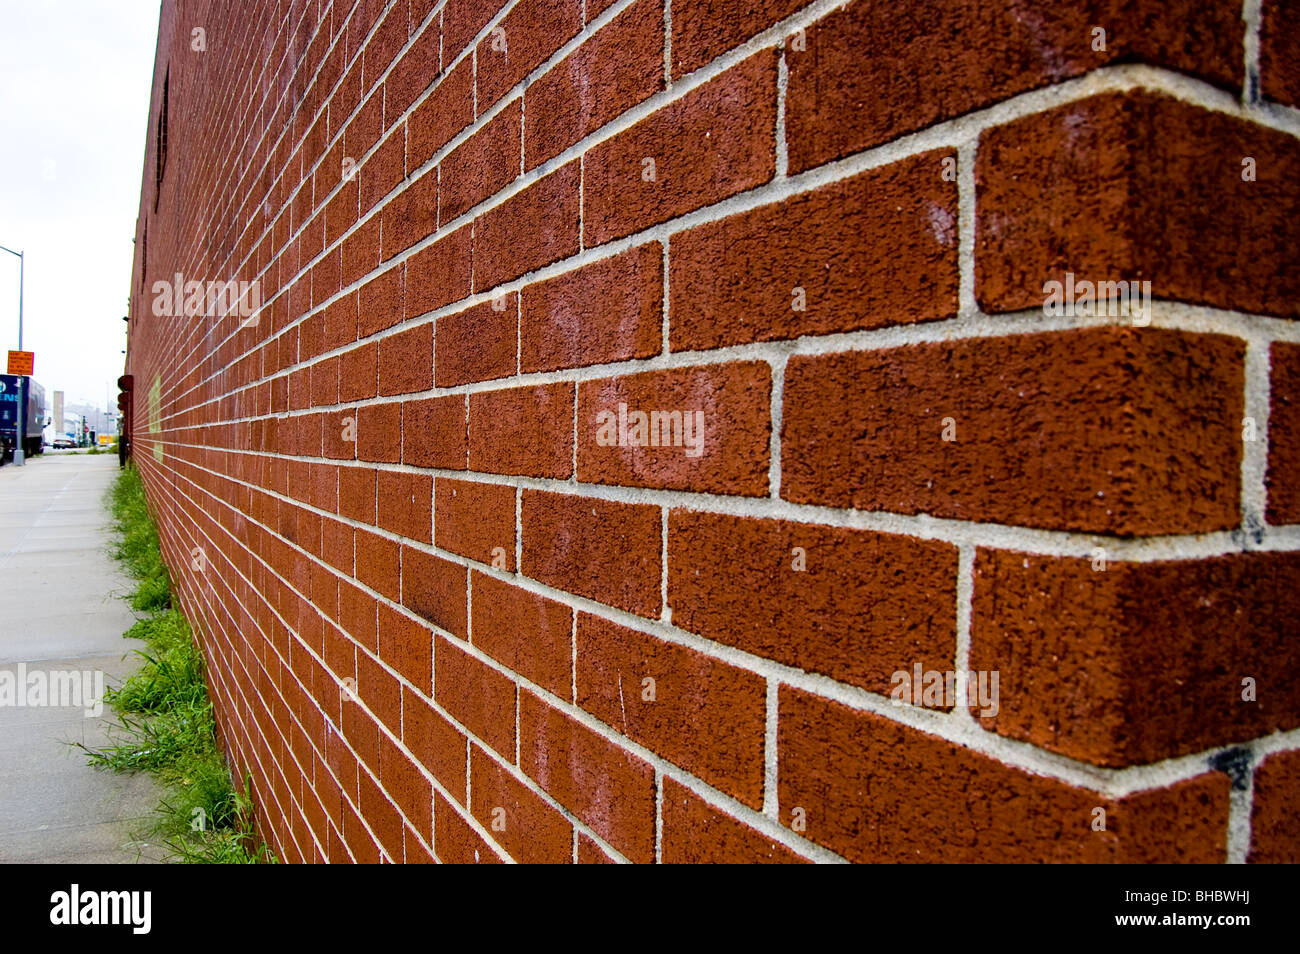 The corner and wall of a long brick wall as seen in perspective. Stock Photo